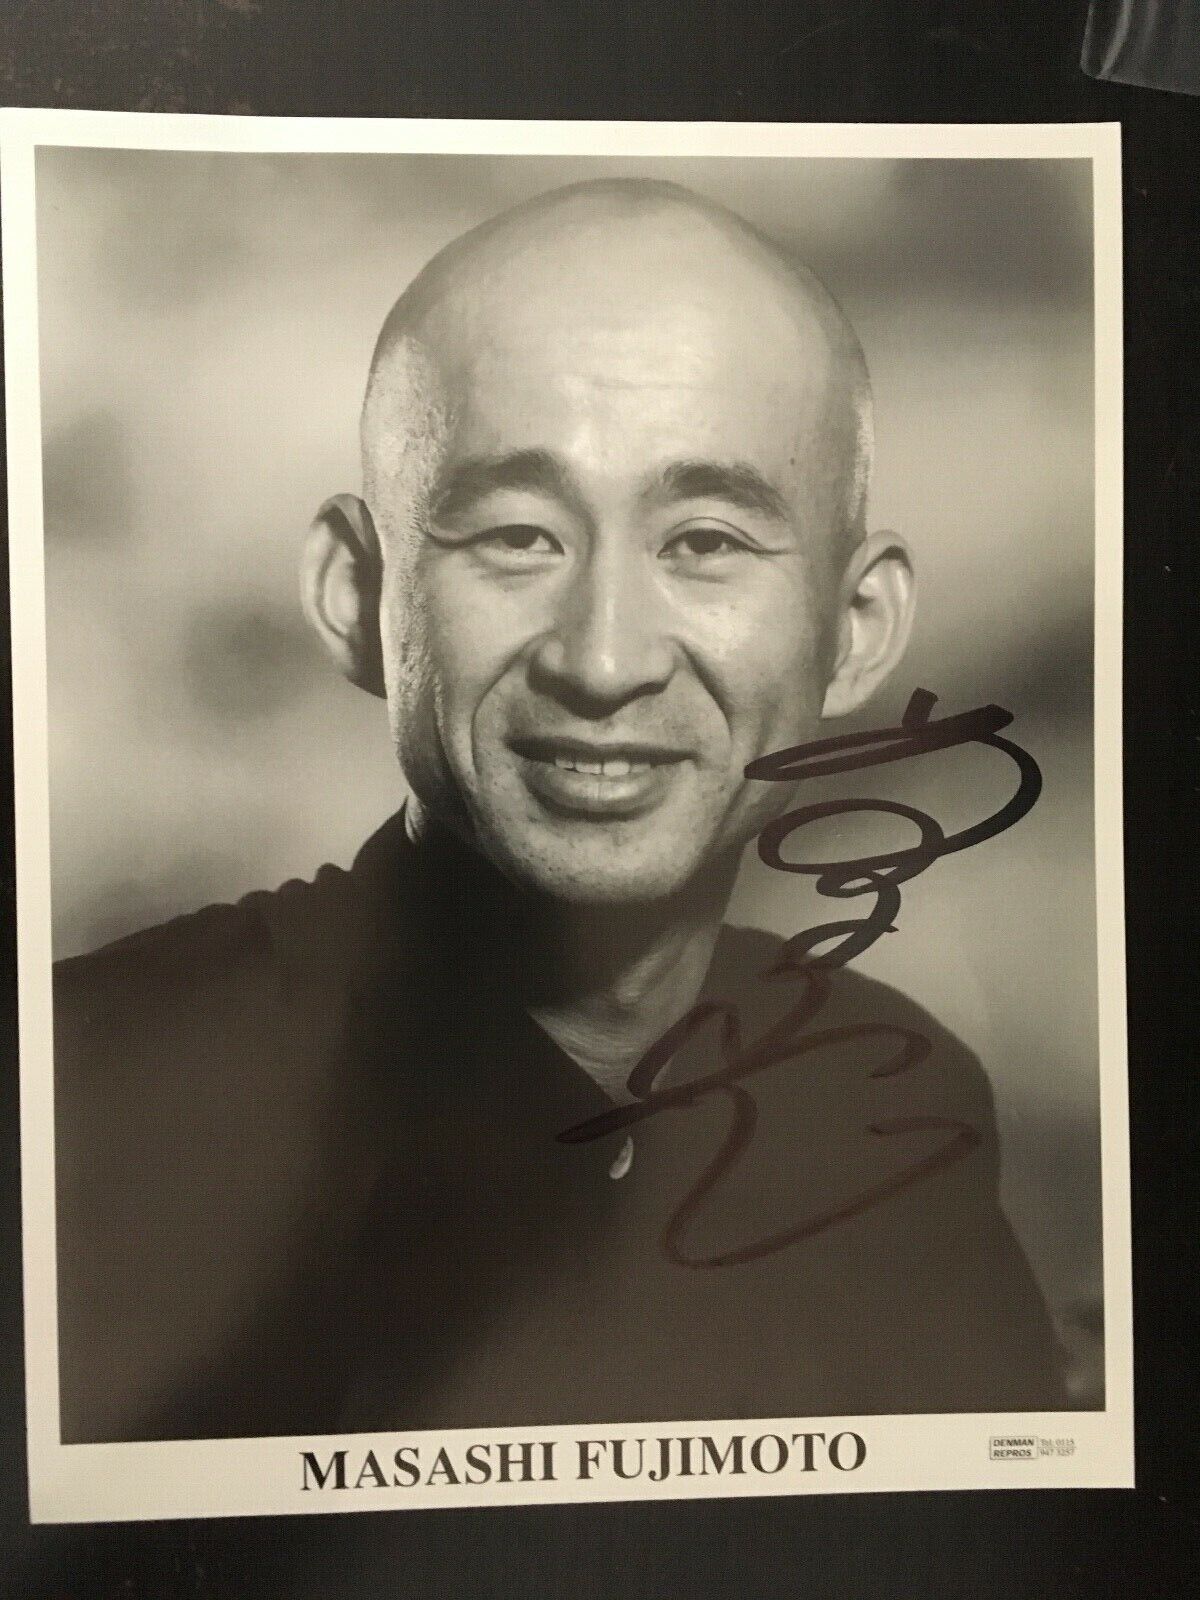 MASASHI FUJIMOTO - ENTERTAINER & TV PRESENTER - EXCELLENT SIGNED Photo Poster painting